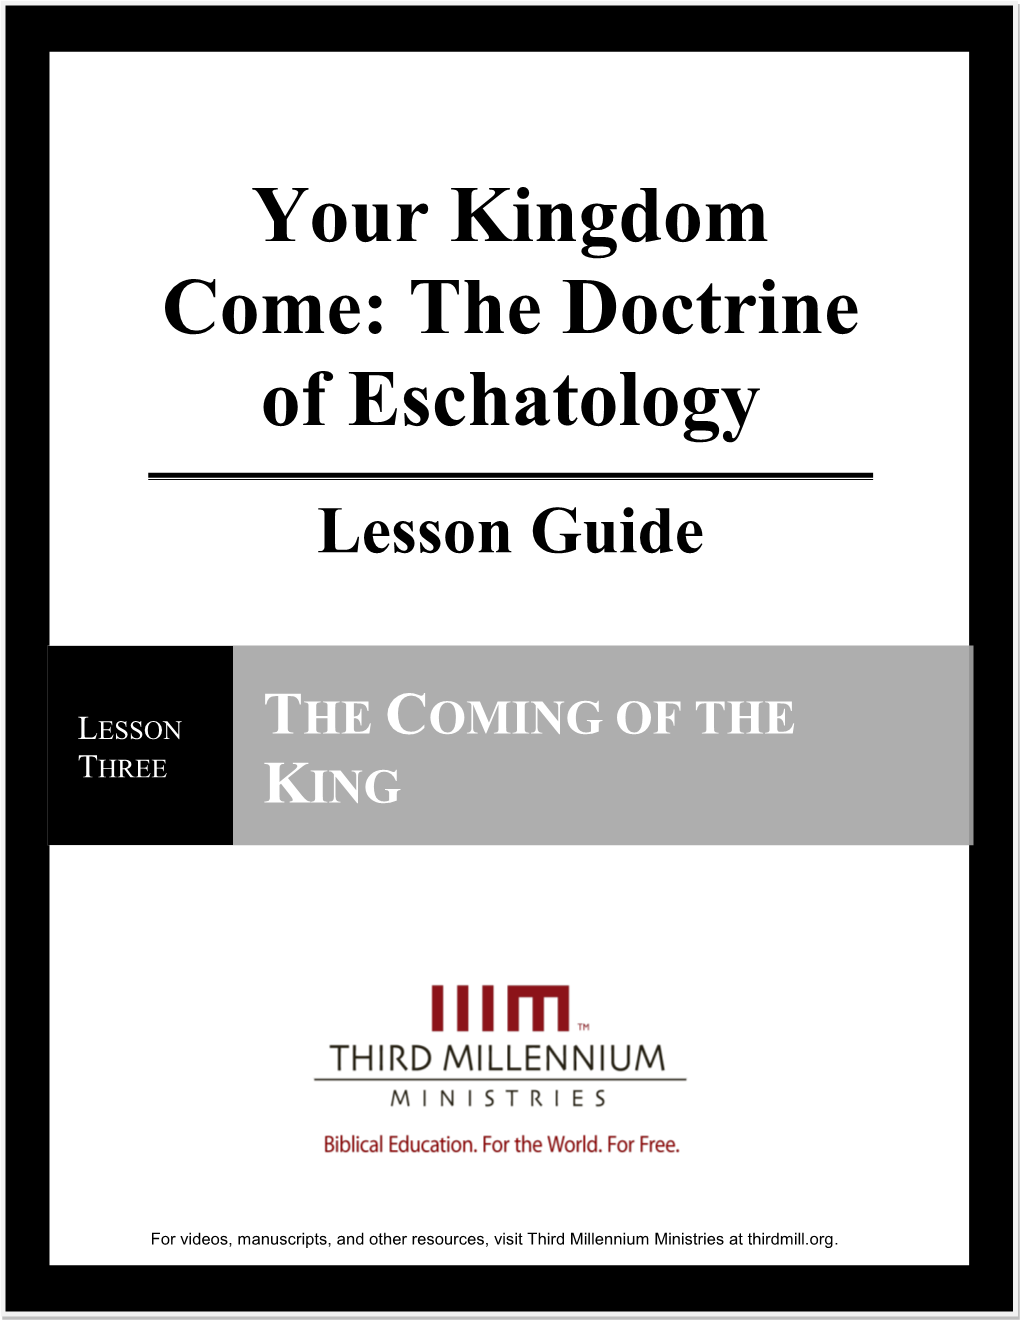 The Doctrine of Eschatology Lesson Guide